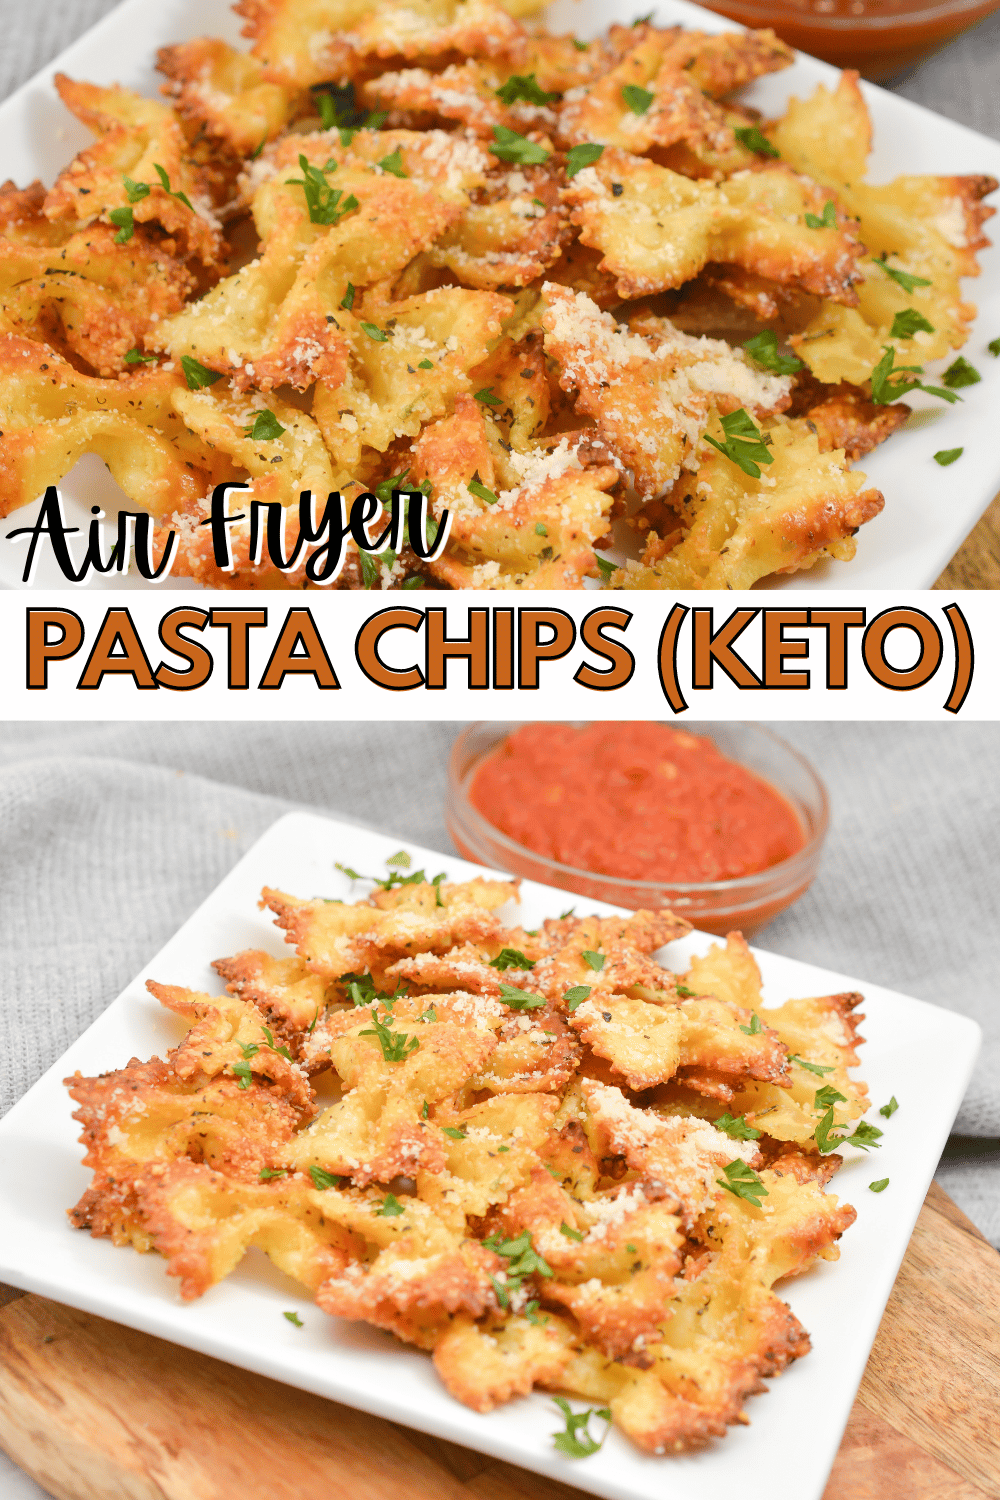 Air Fryer Pasta Chips are the perfect snack! They're crispy, full of flavor, and easy to make. All you need is pasta and some seasonings. #airfryer #airfryerpastachips #pastachips via @wondermomwannab